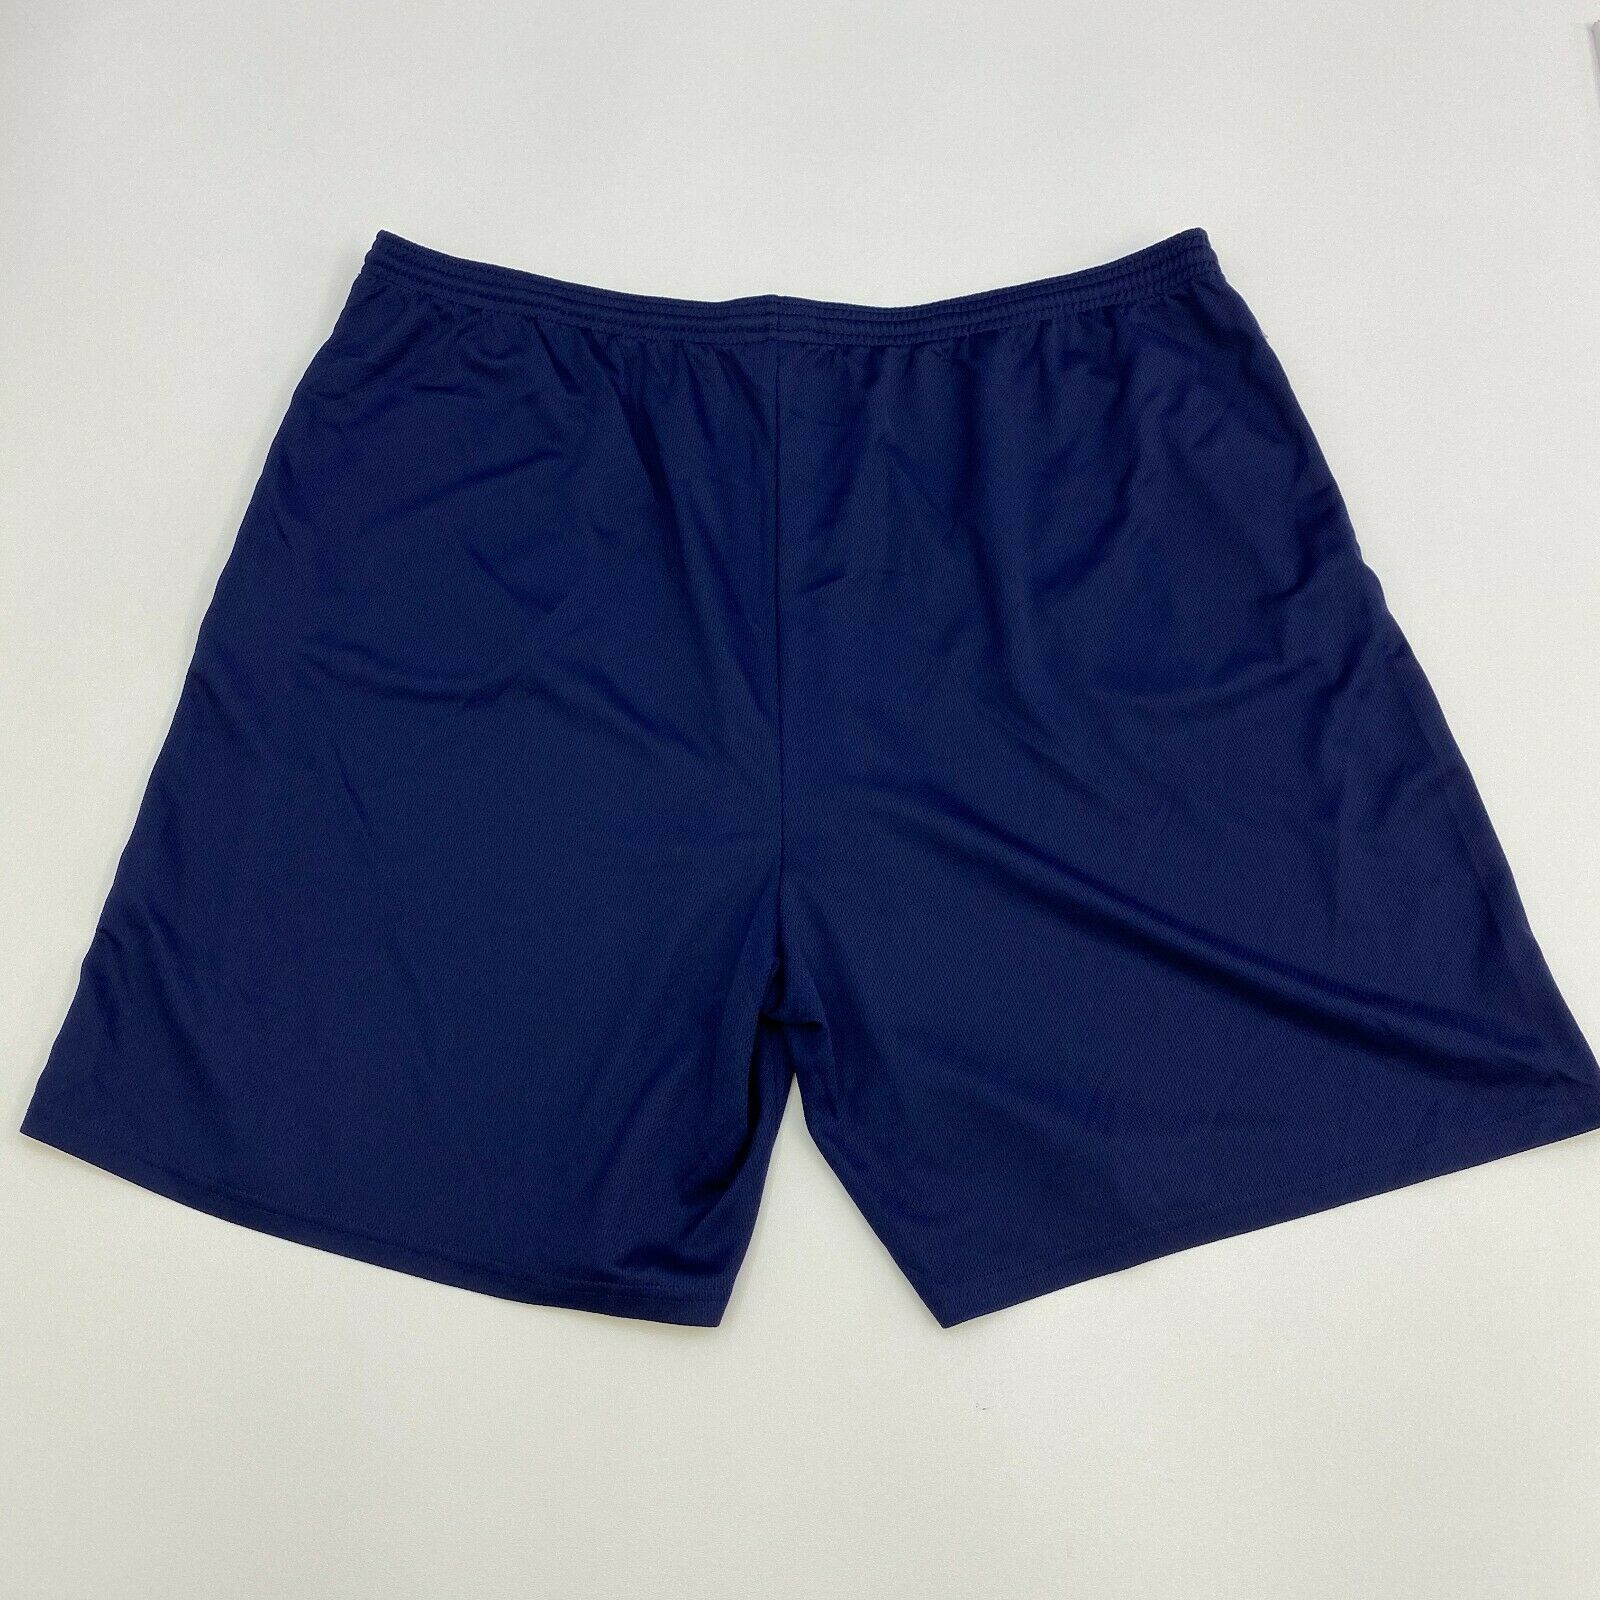 Russell Athletic Shorts Mens XXL Dri Power Navy Blue Casual Workout ...